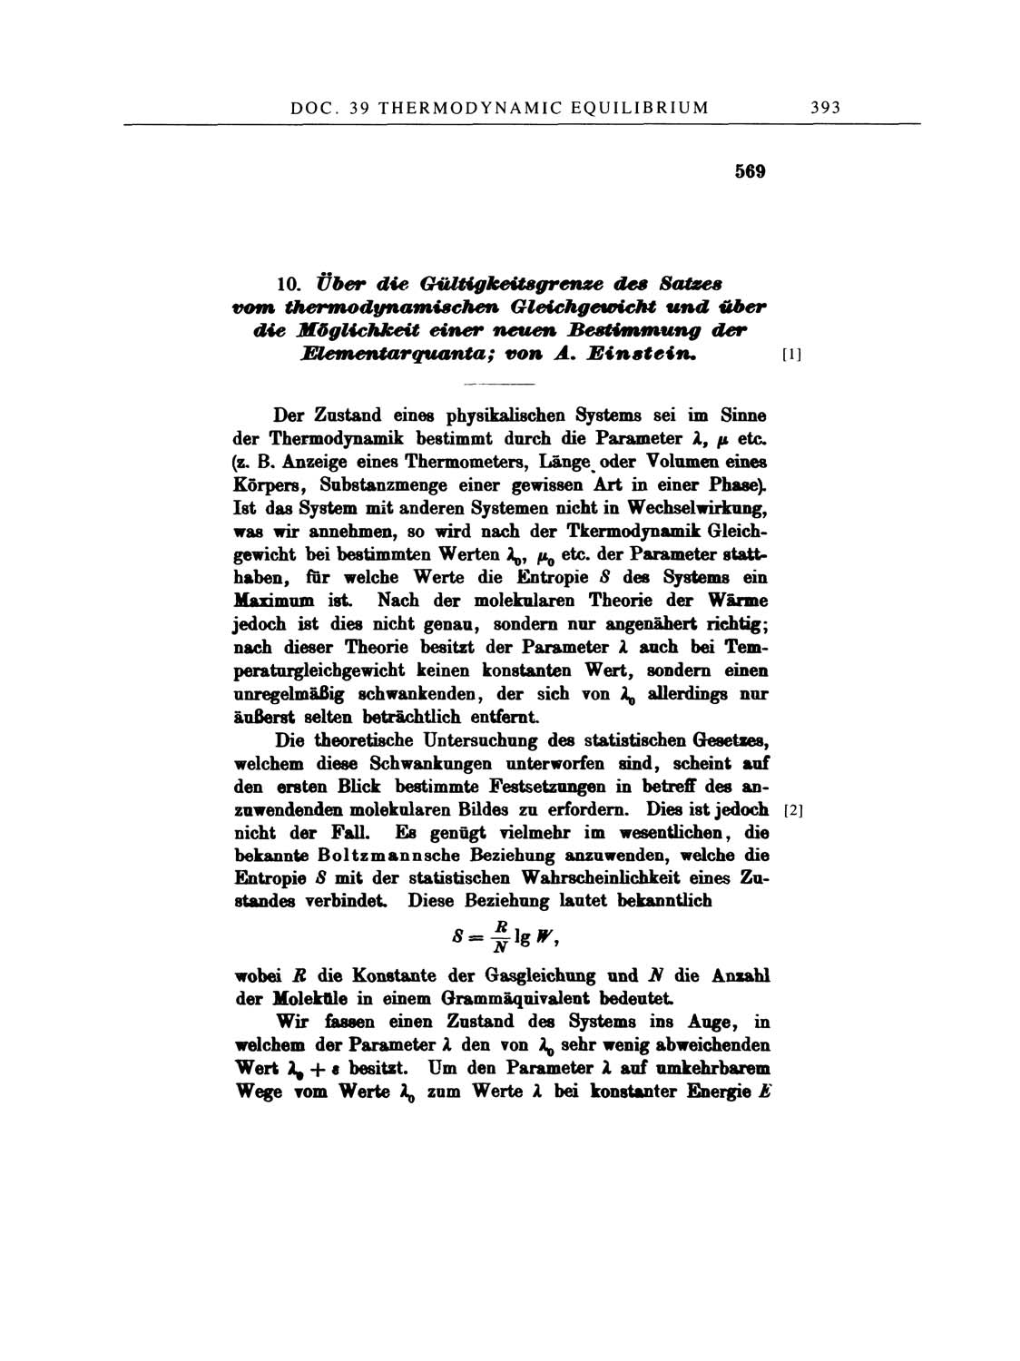 Volume 2: The Swiss Years: Writings, 1900-1909 page 393